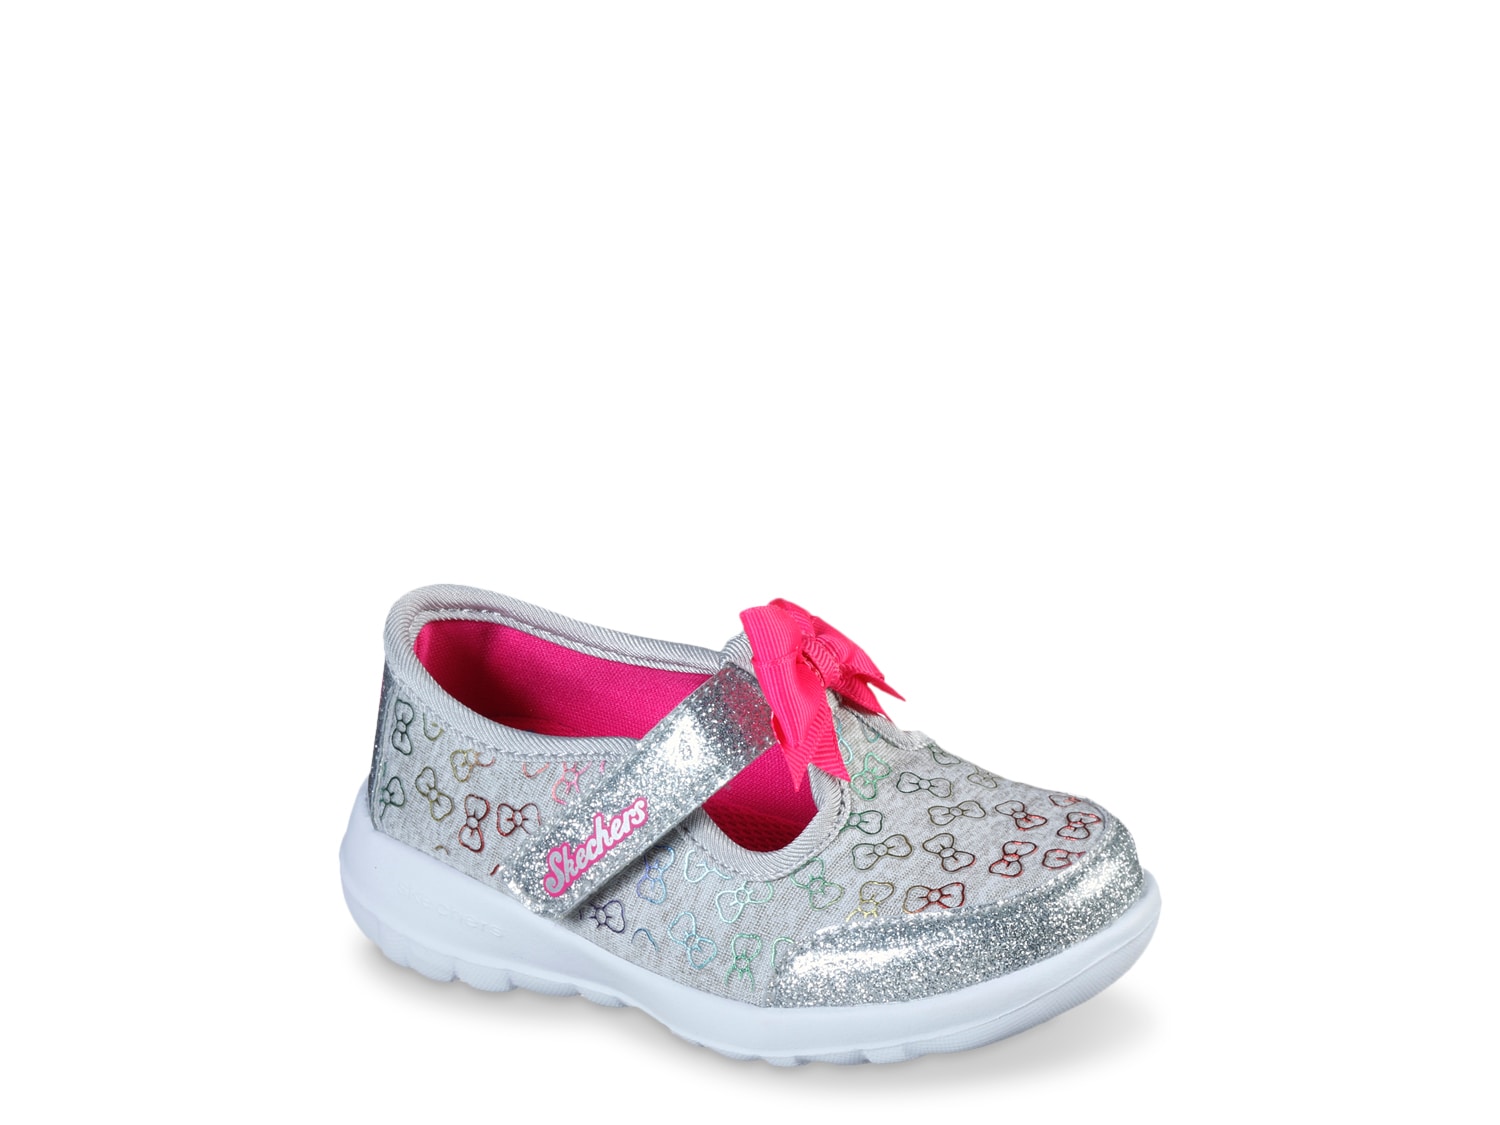 Skechers Bitty Toddler Shoes Shop, SAVE